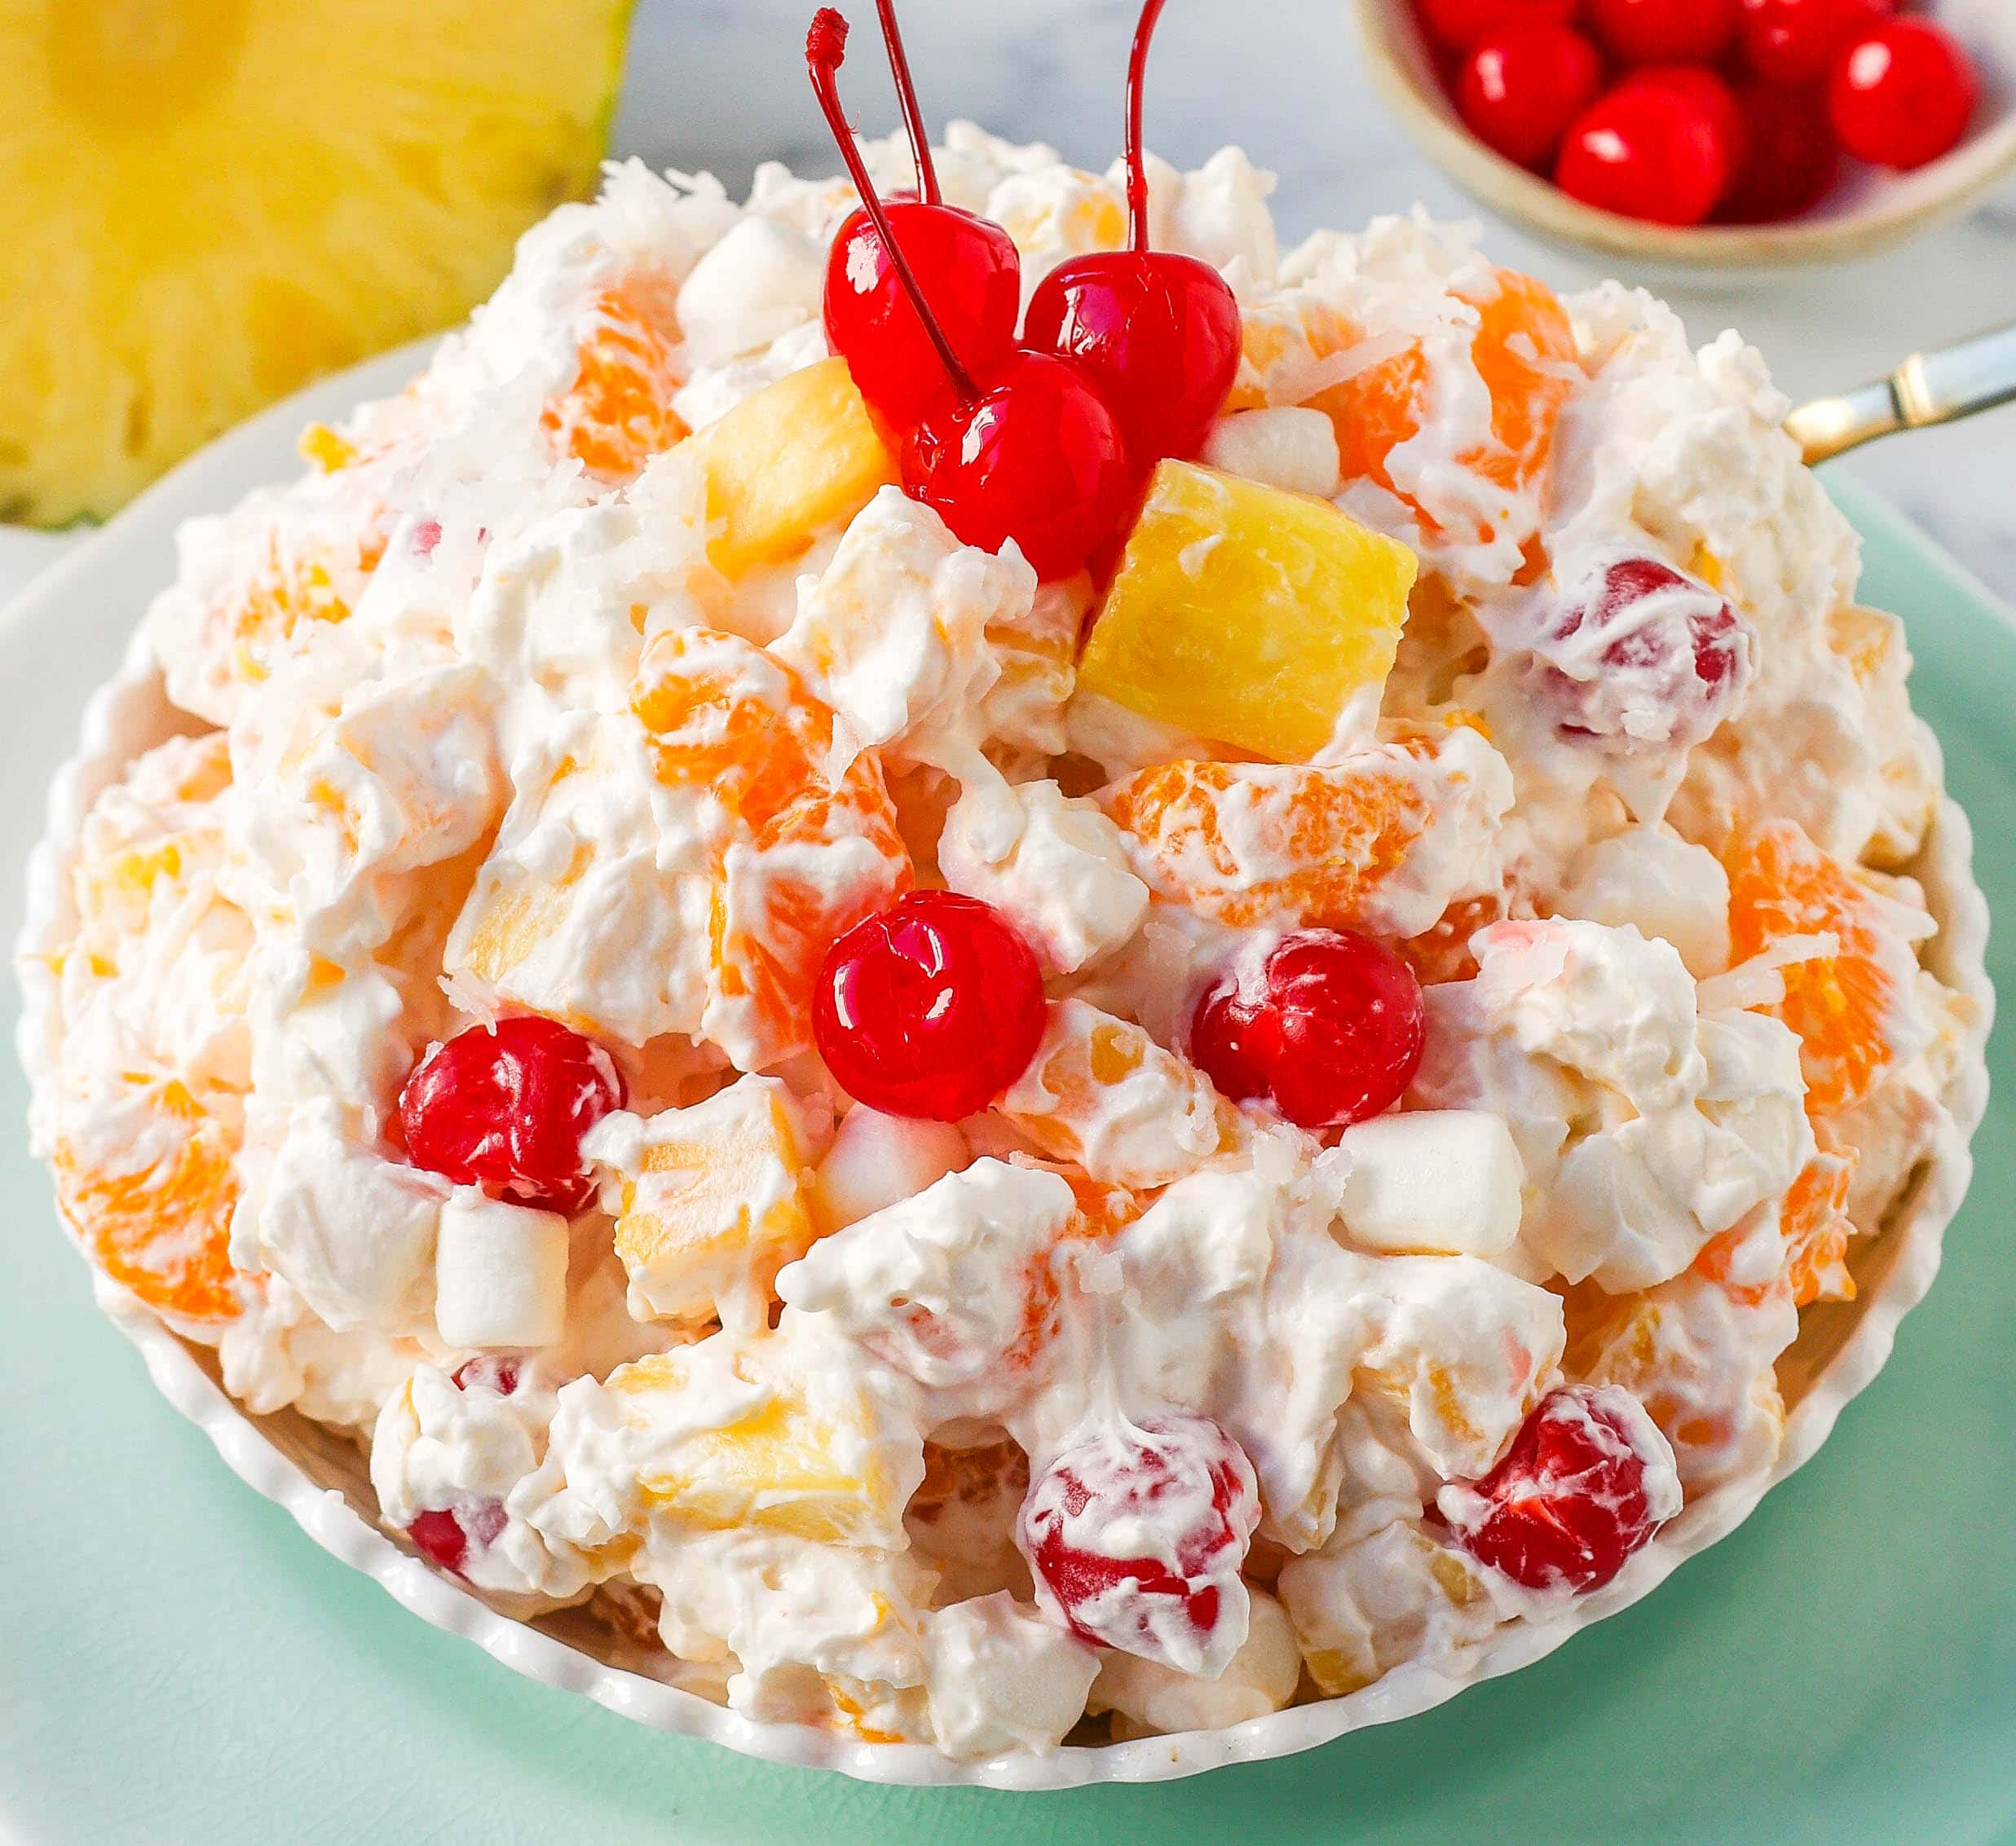 The Best Ambrosia Salad is a fluffy salad made with fresh pineapple, mandarin oranges, maraschino cherries, coconut, marshmallows, fresh whipped cream, a touch of sour cream, and sugar. This is a nostalgic, classic side dish or dessert recipe.